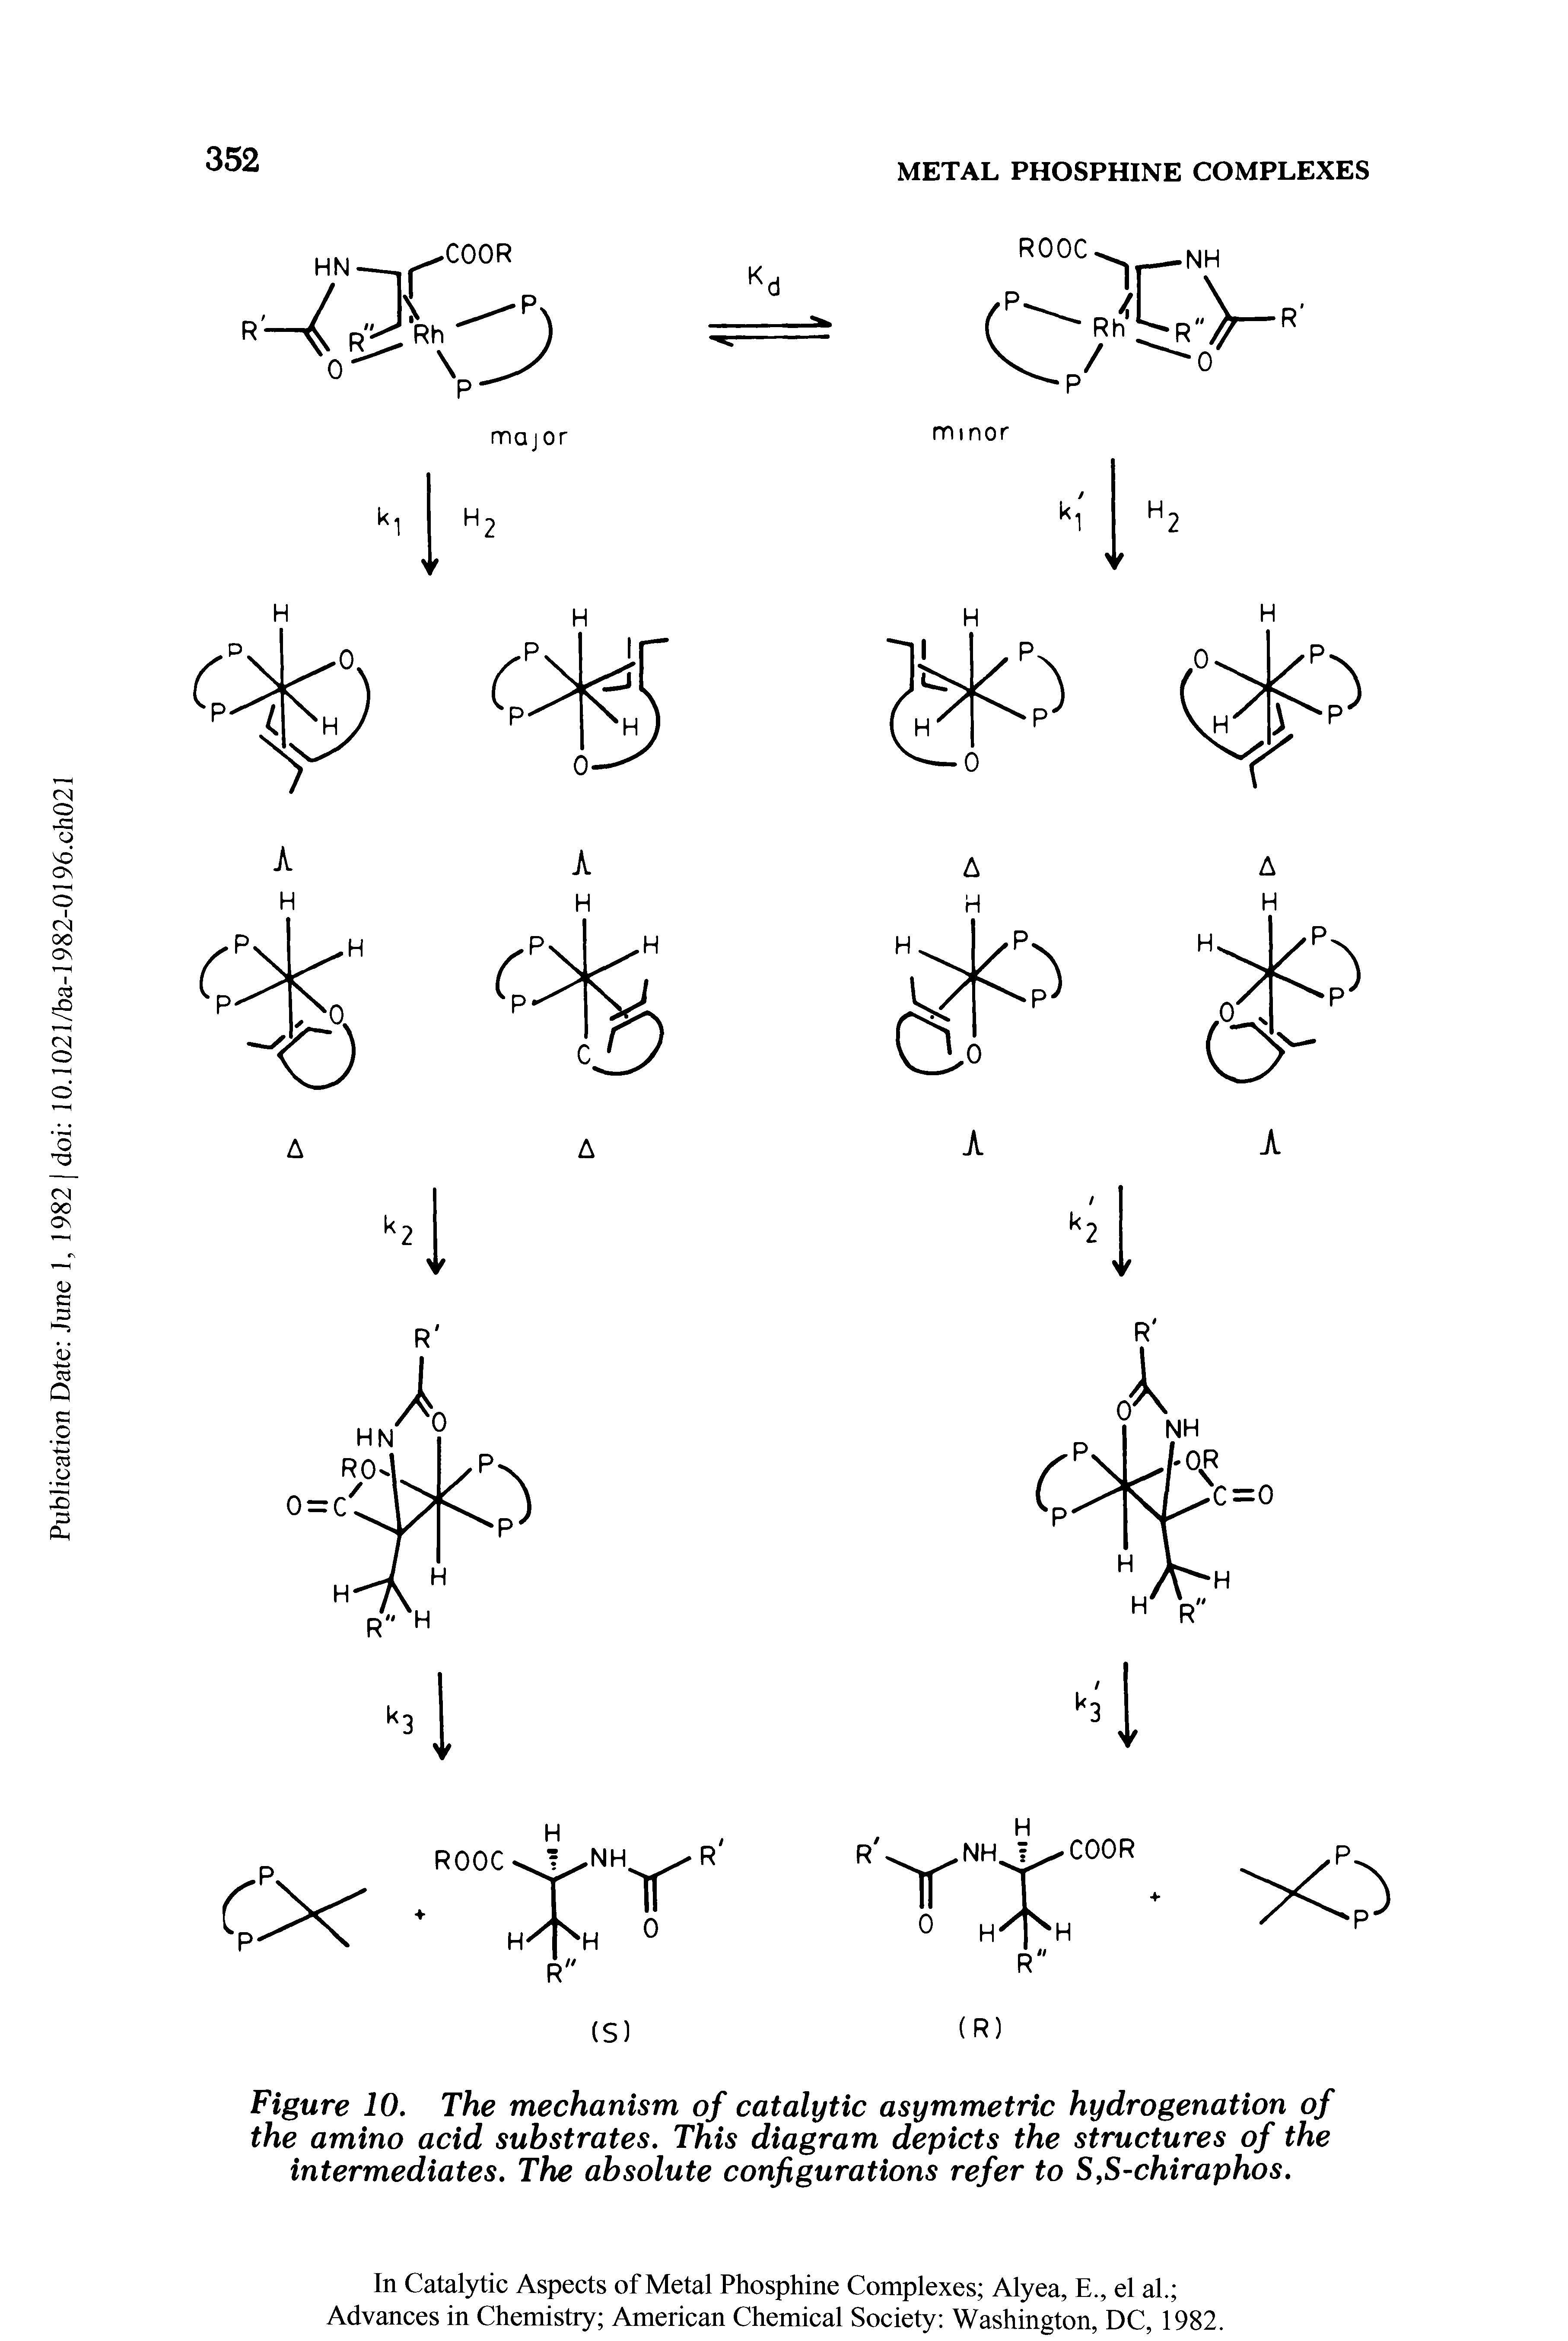 Figure 10. The mechanism of catalytic asymmetric hydrogenation of the amino acid substrates. This diagram depicts the structures of the intermediates. The absolute configurations refer to S,S-chiraphos.